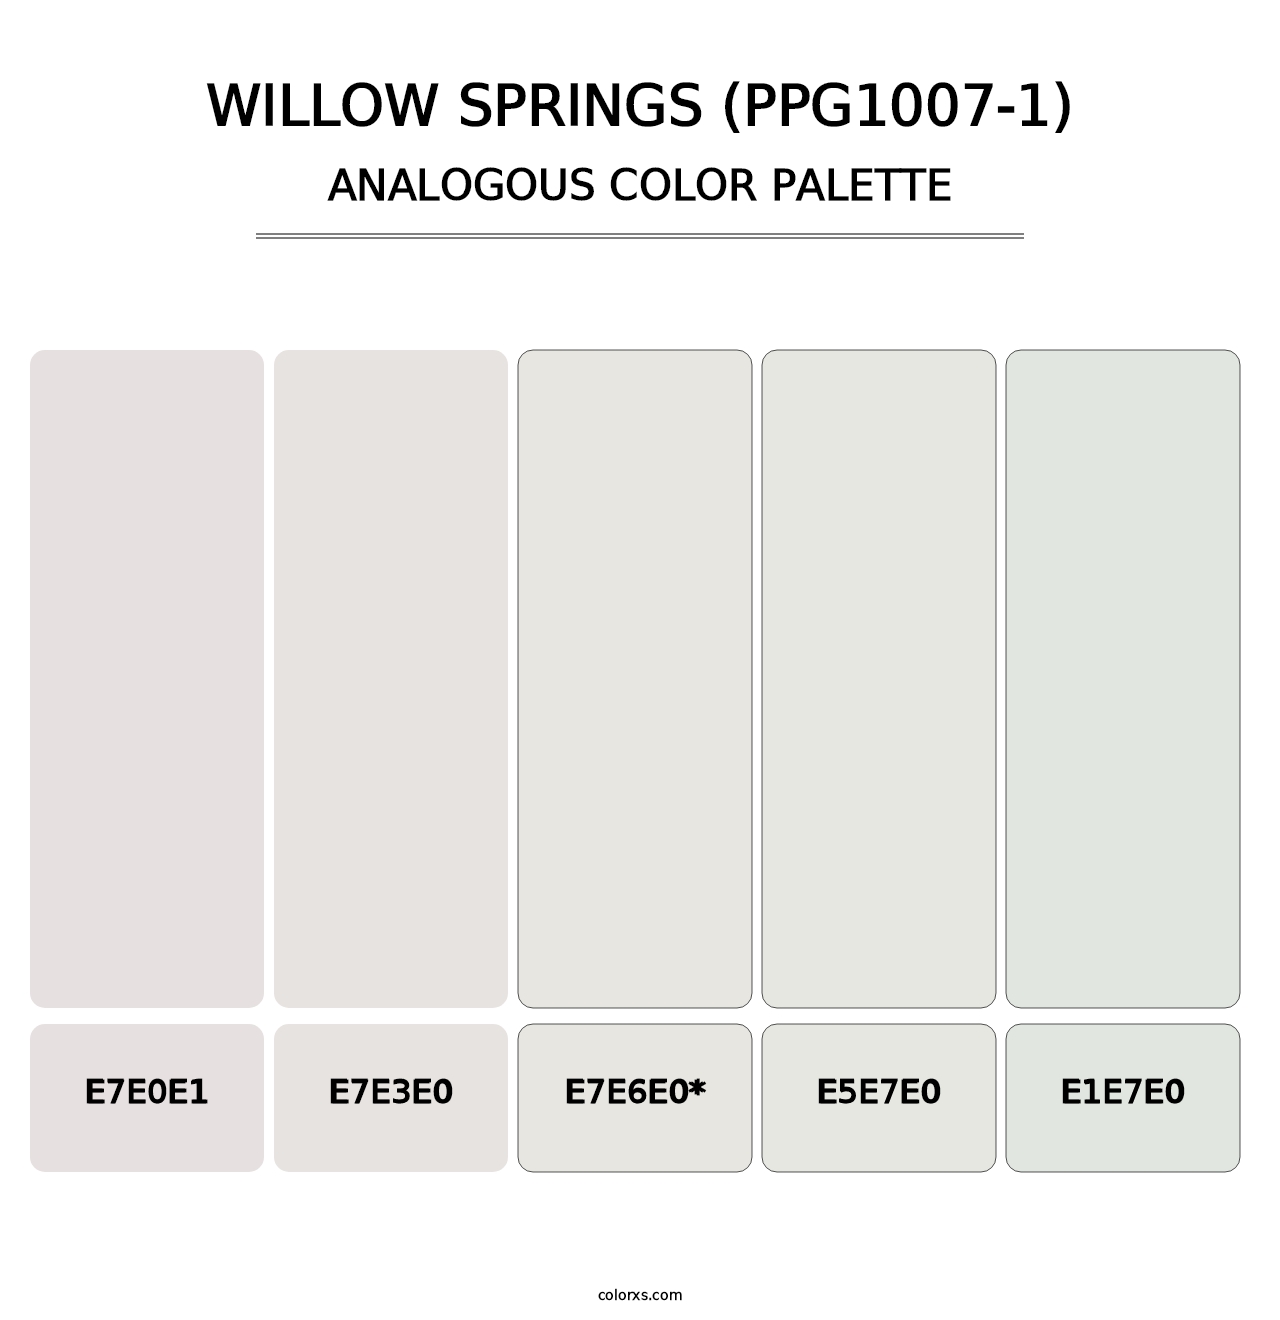 Willow Springs (PPG1007-1) - Analogous Color Palette